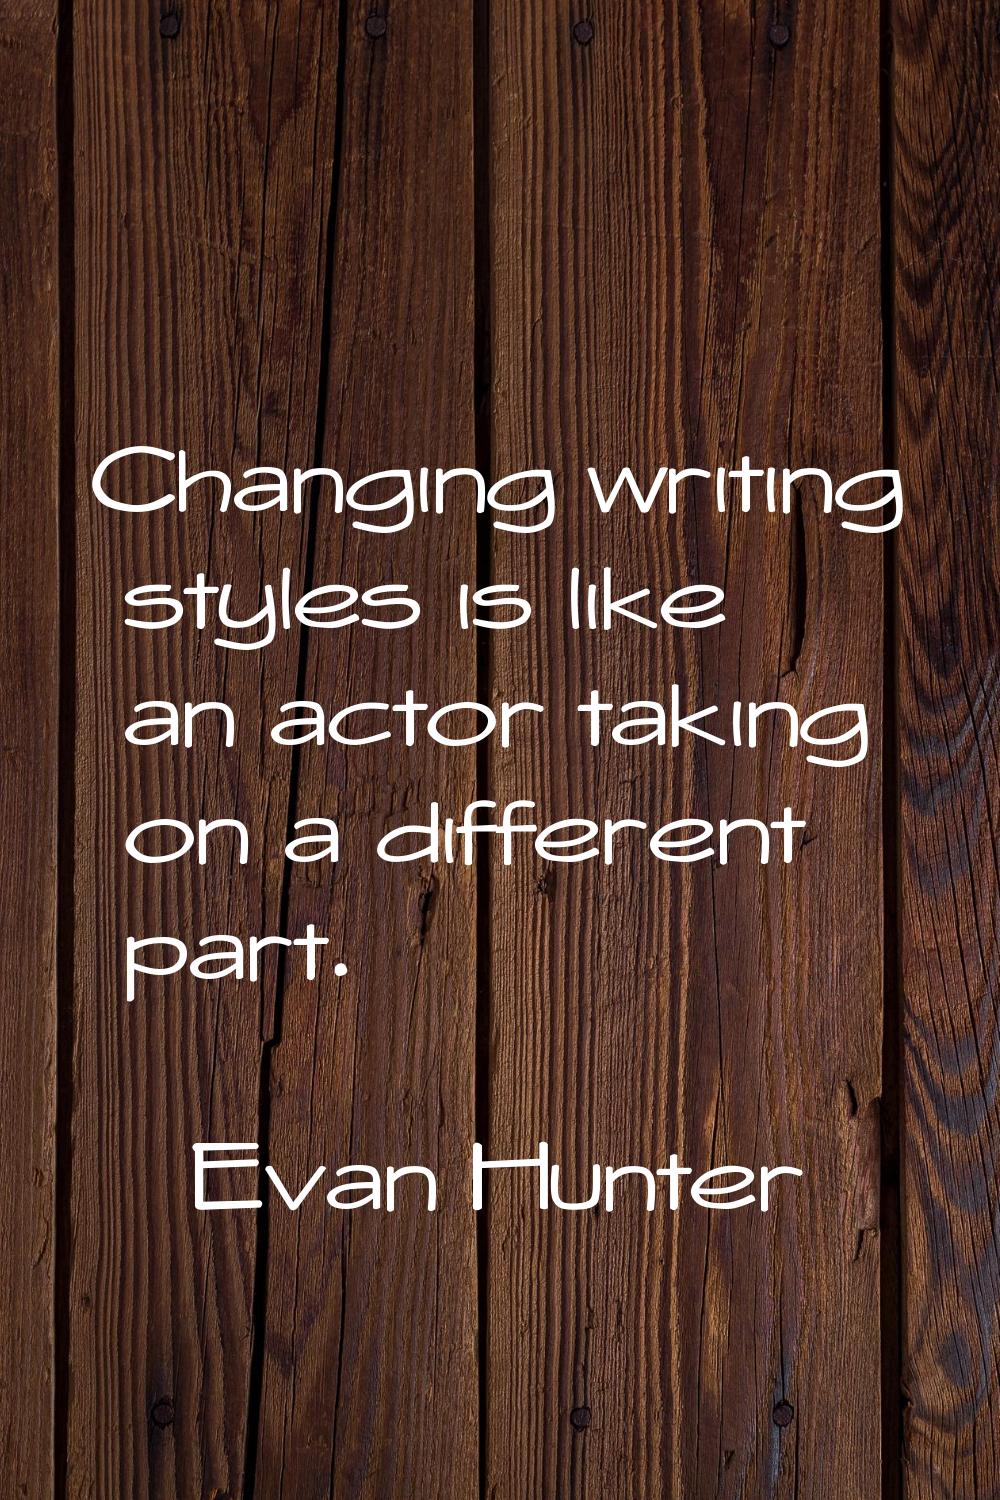 Changing writing styles is like an actor taking on a different part.